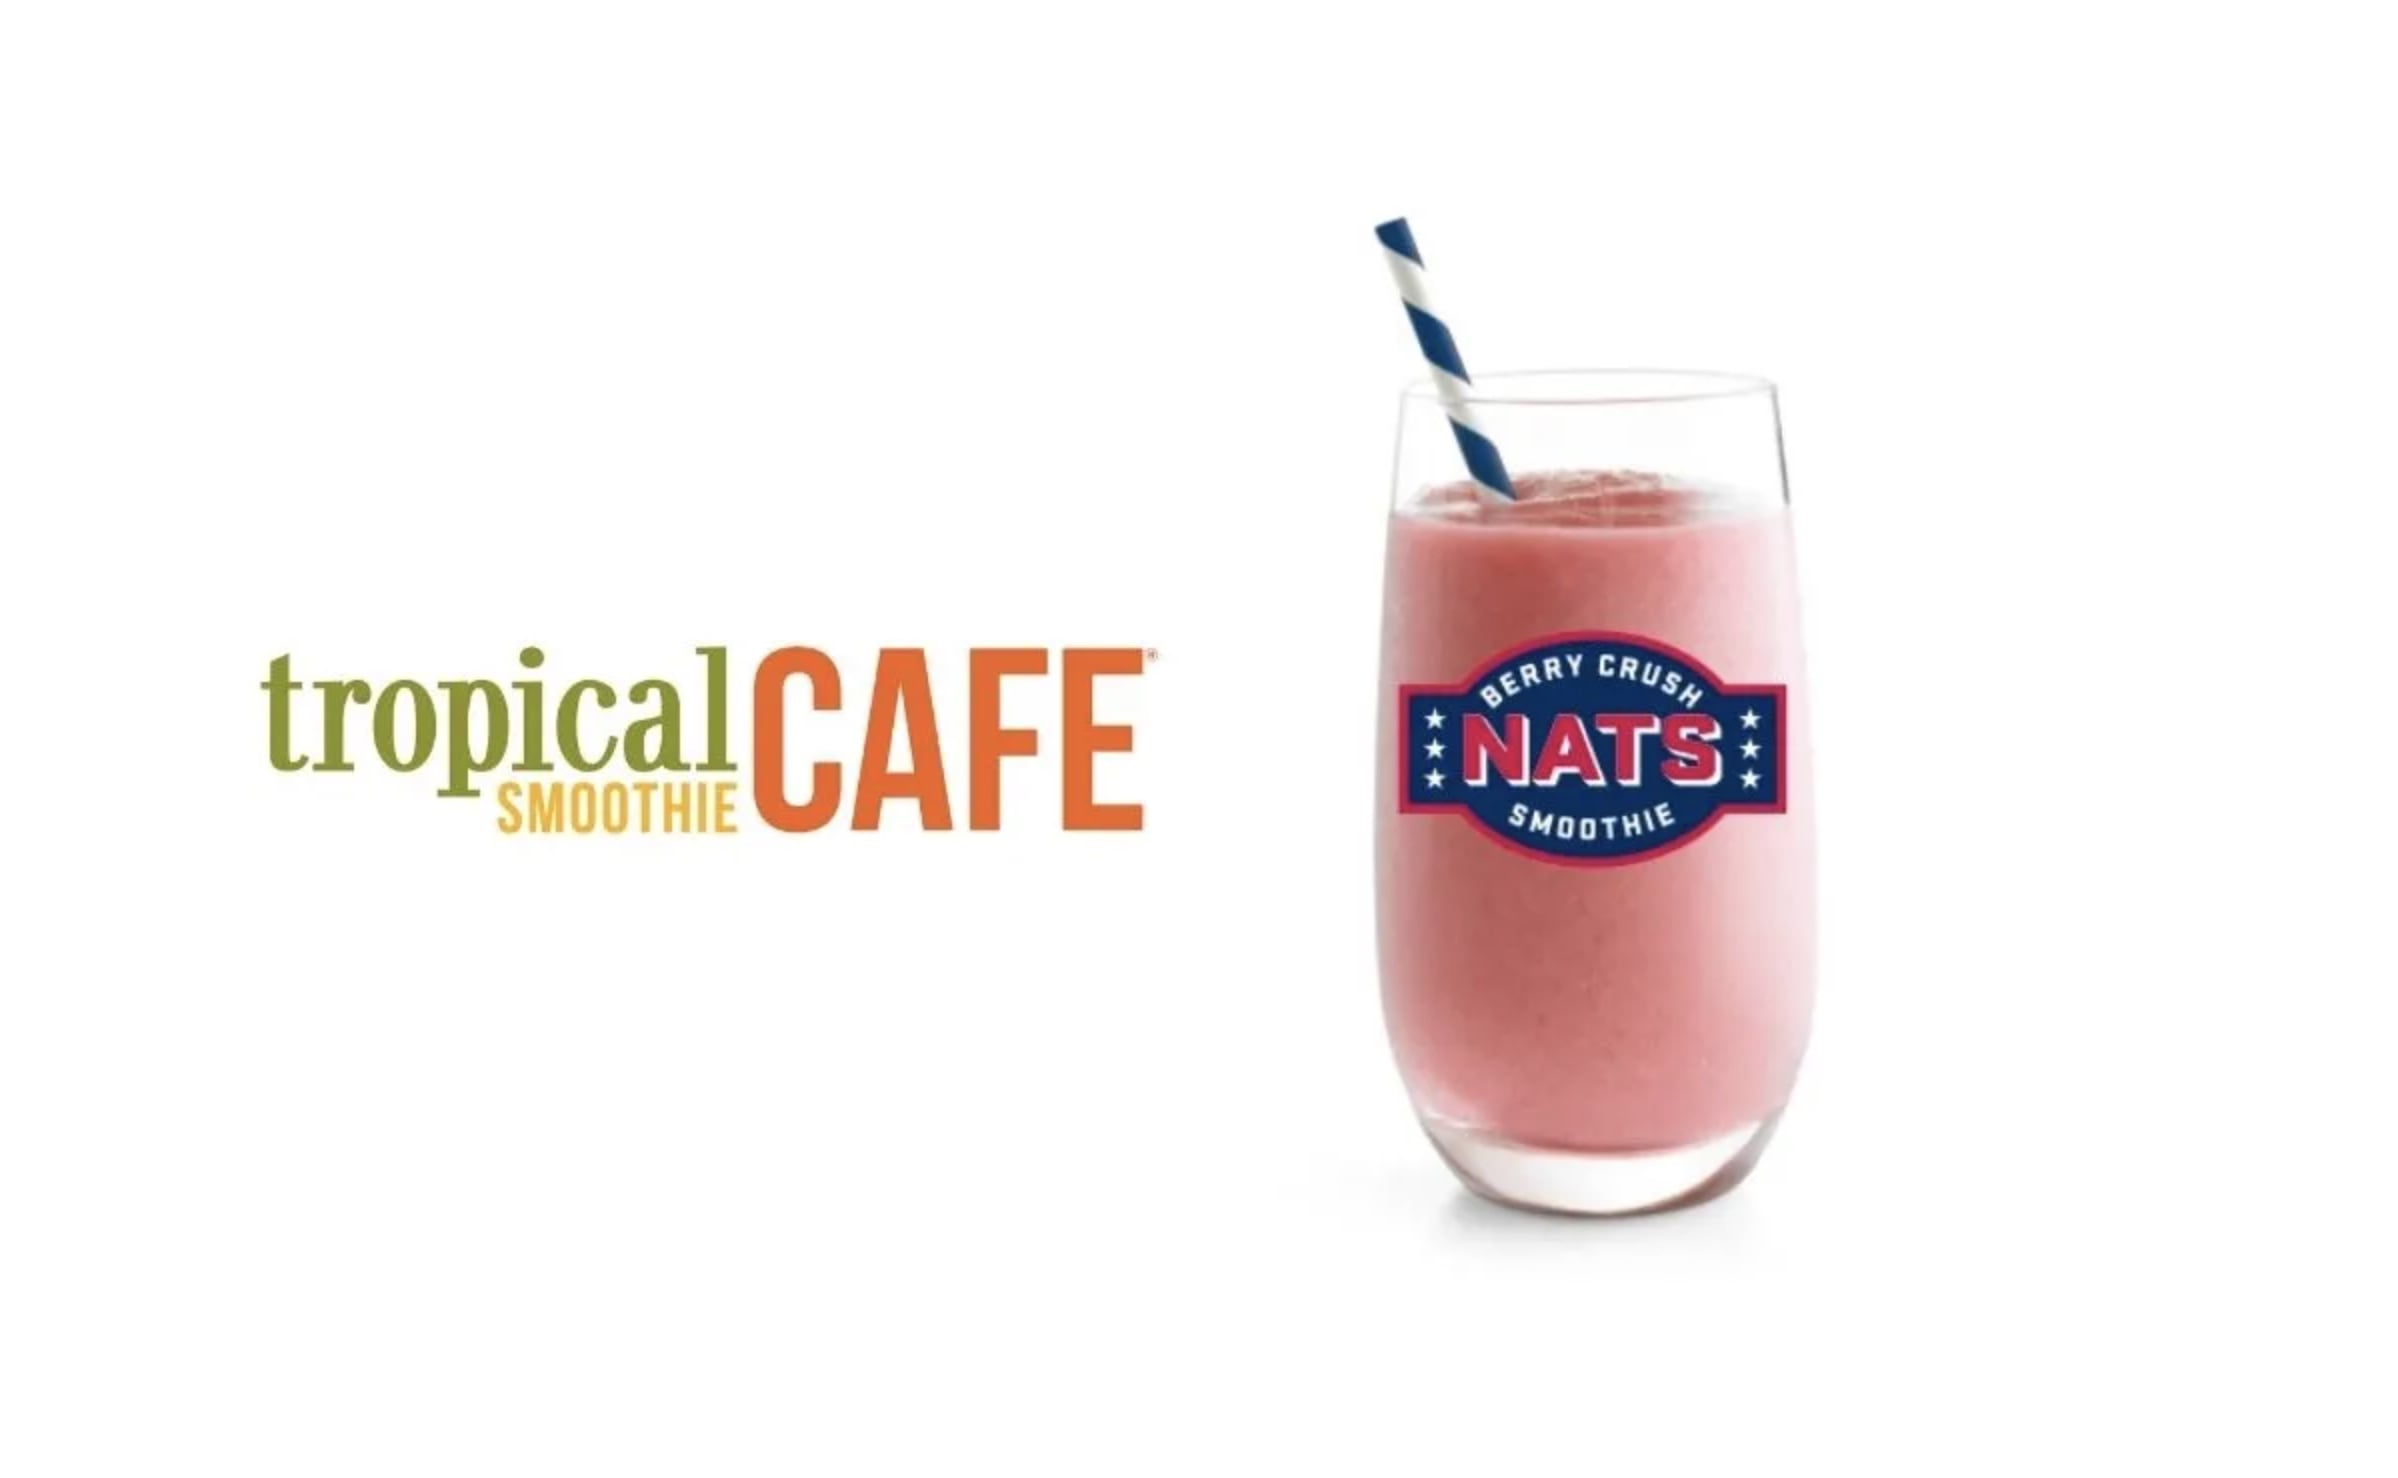 Tropical Smoothie Cafe And The Washington Nationals Slide Into Baseball Season With The Return Of The Nats Berry Crush Smoothie